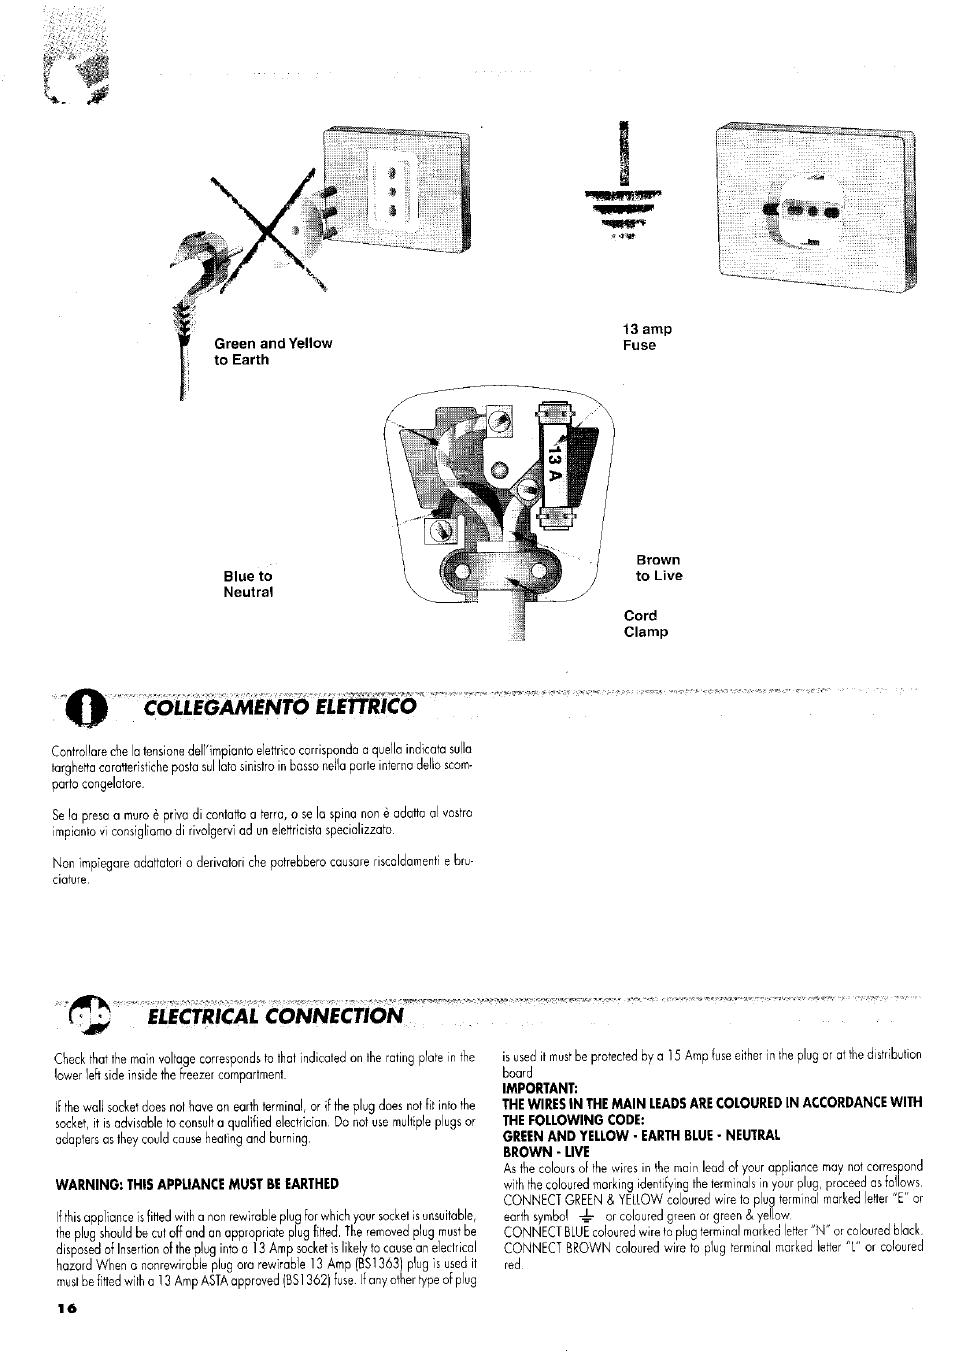 Collegamento elettrico, Electrical connection, Warning: this appliance must be earthed | Important | ZANKER GS 105 User Manual | Page 16 / 31